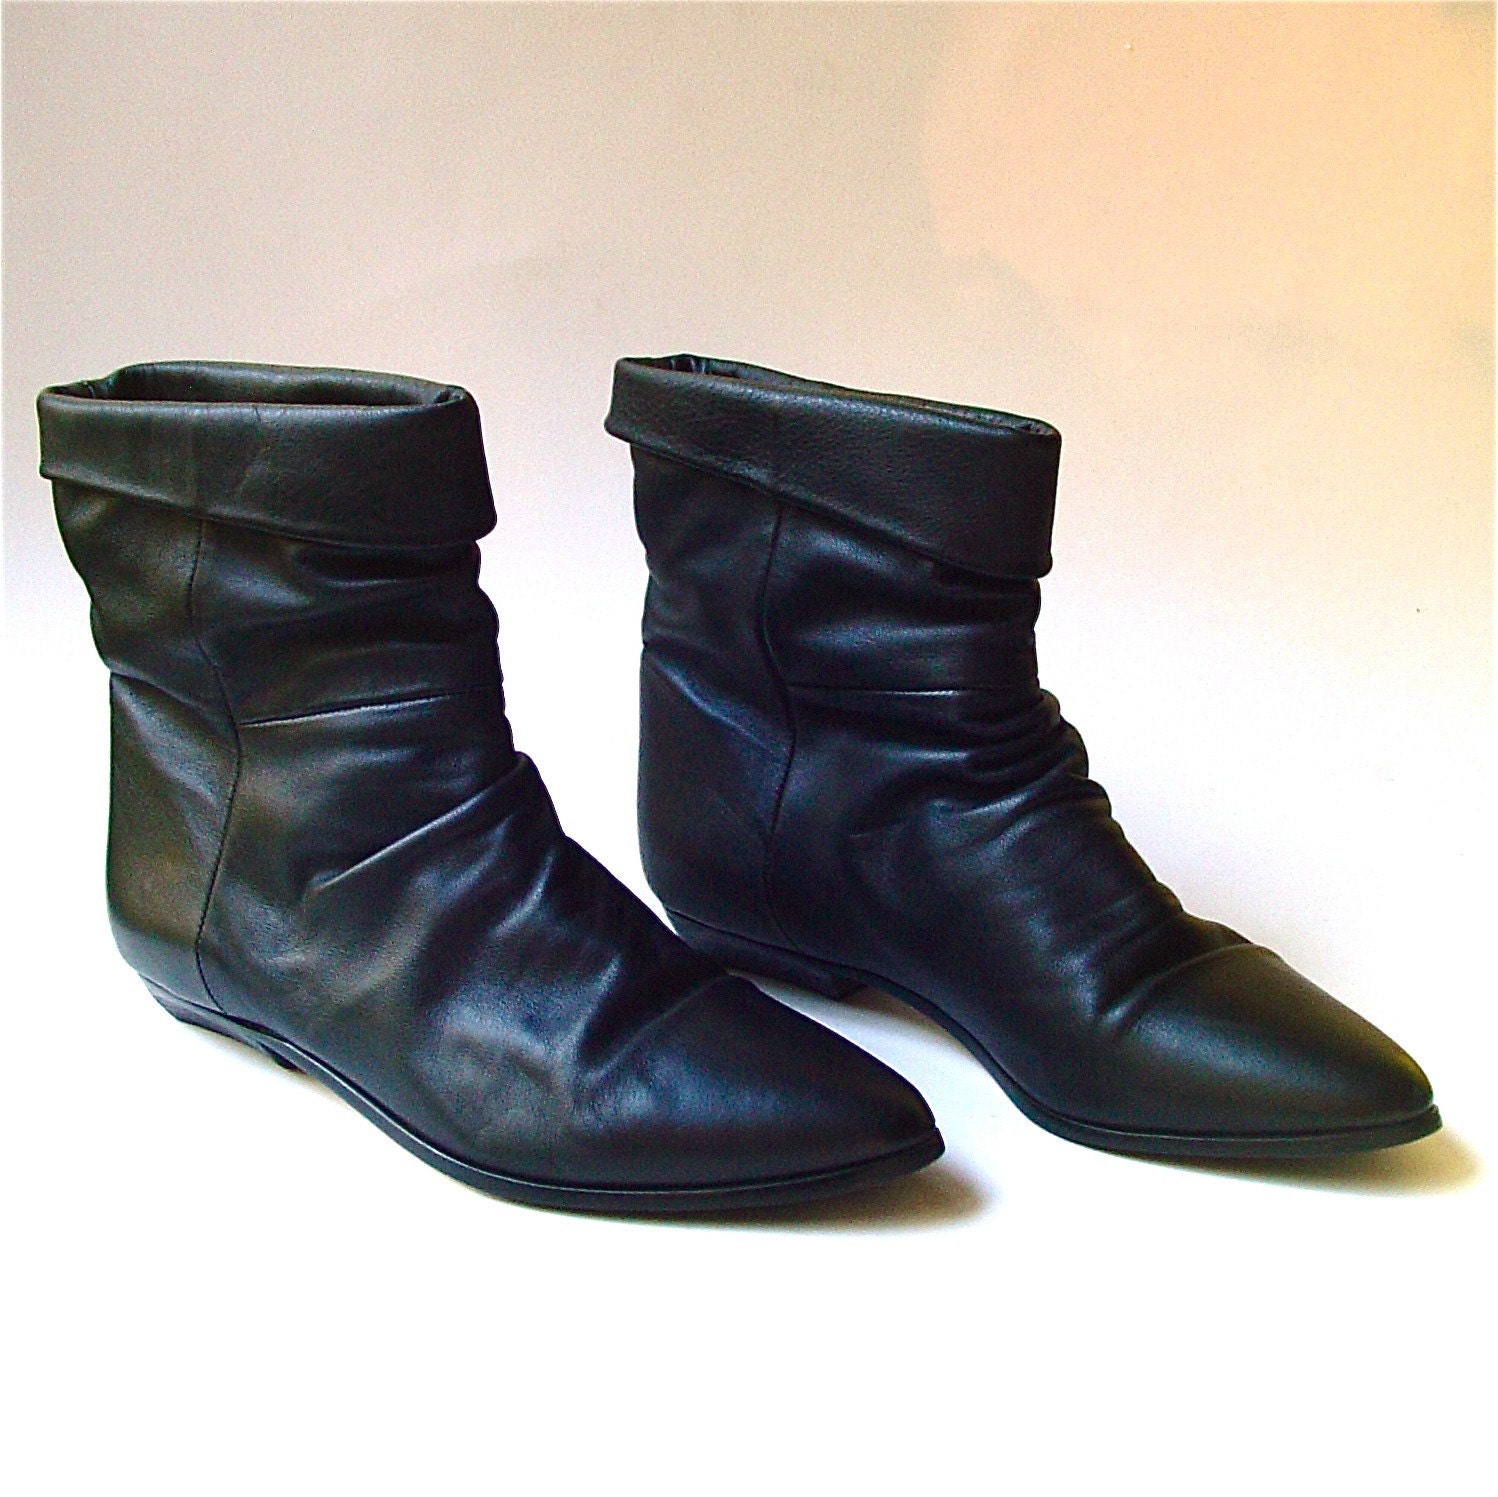 80s vintage Drifter Black Leather Cuffed Boots by SkinnyandBernie